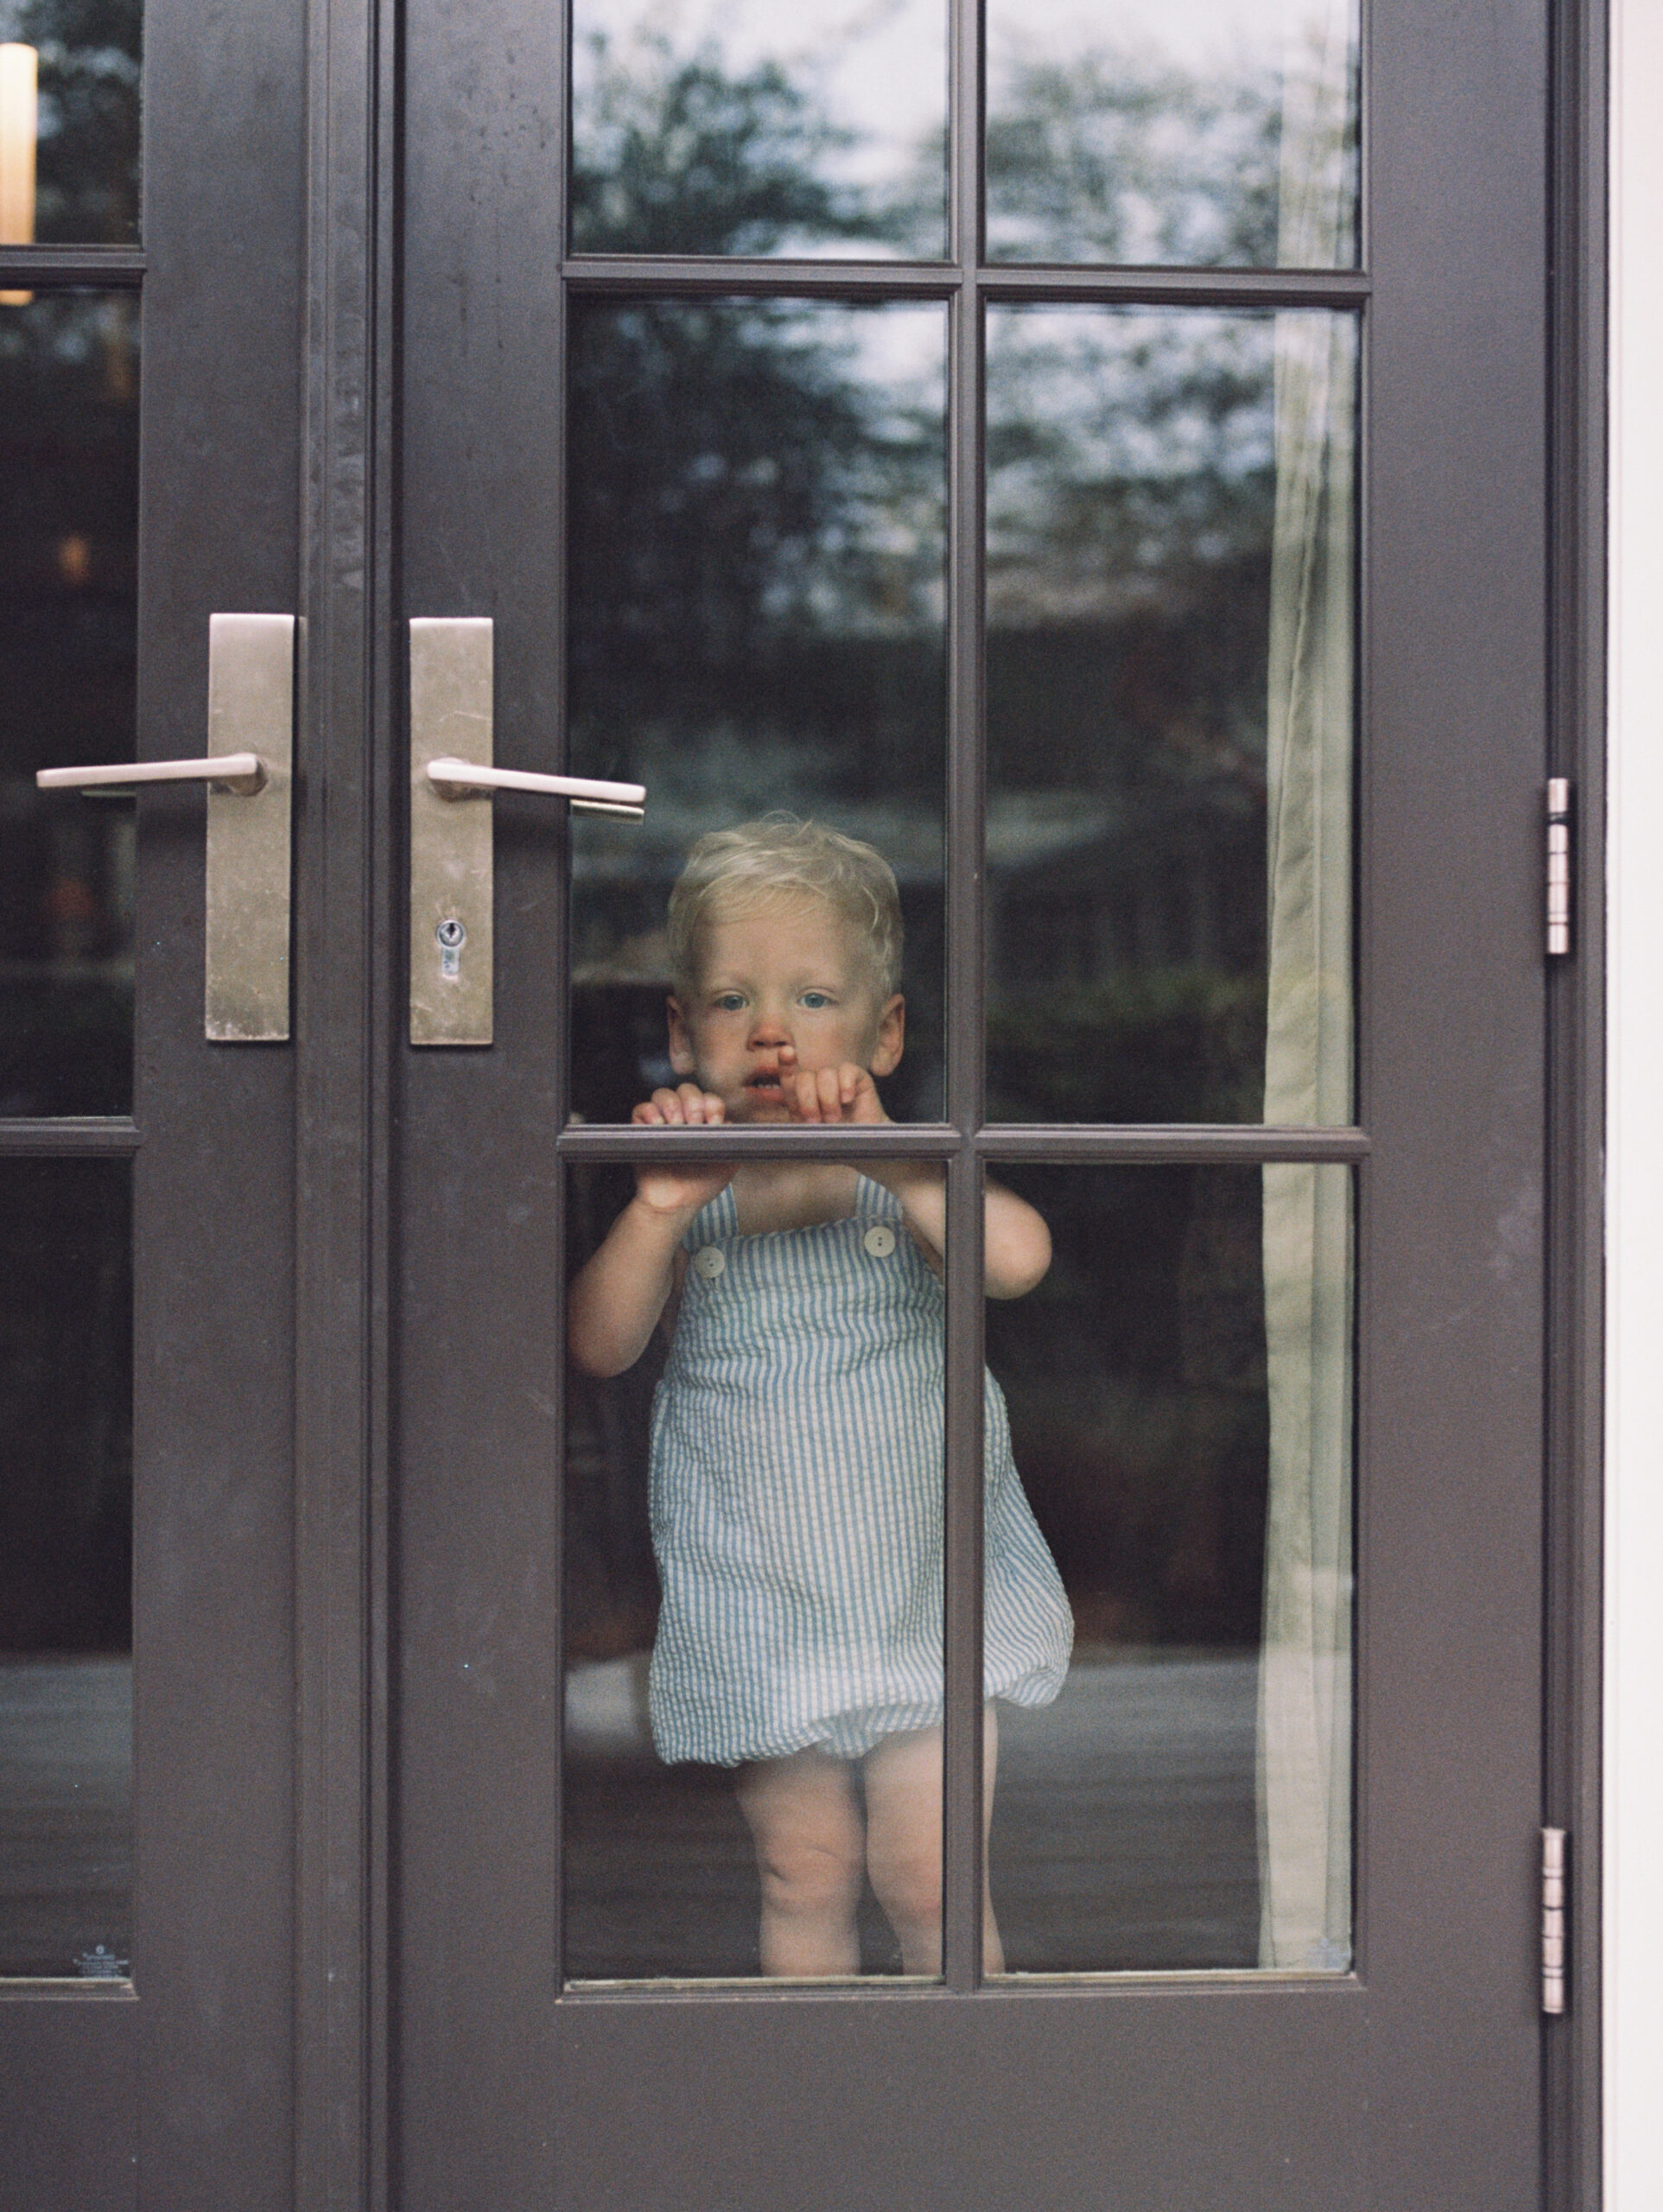 A little boy with blonde hair and blue eyes peeking out the front door.